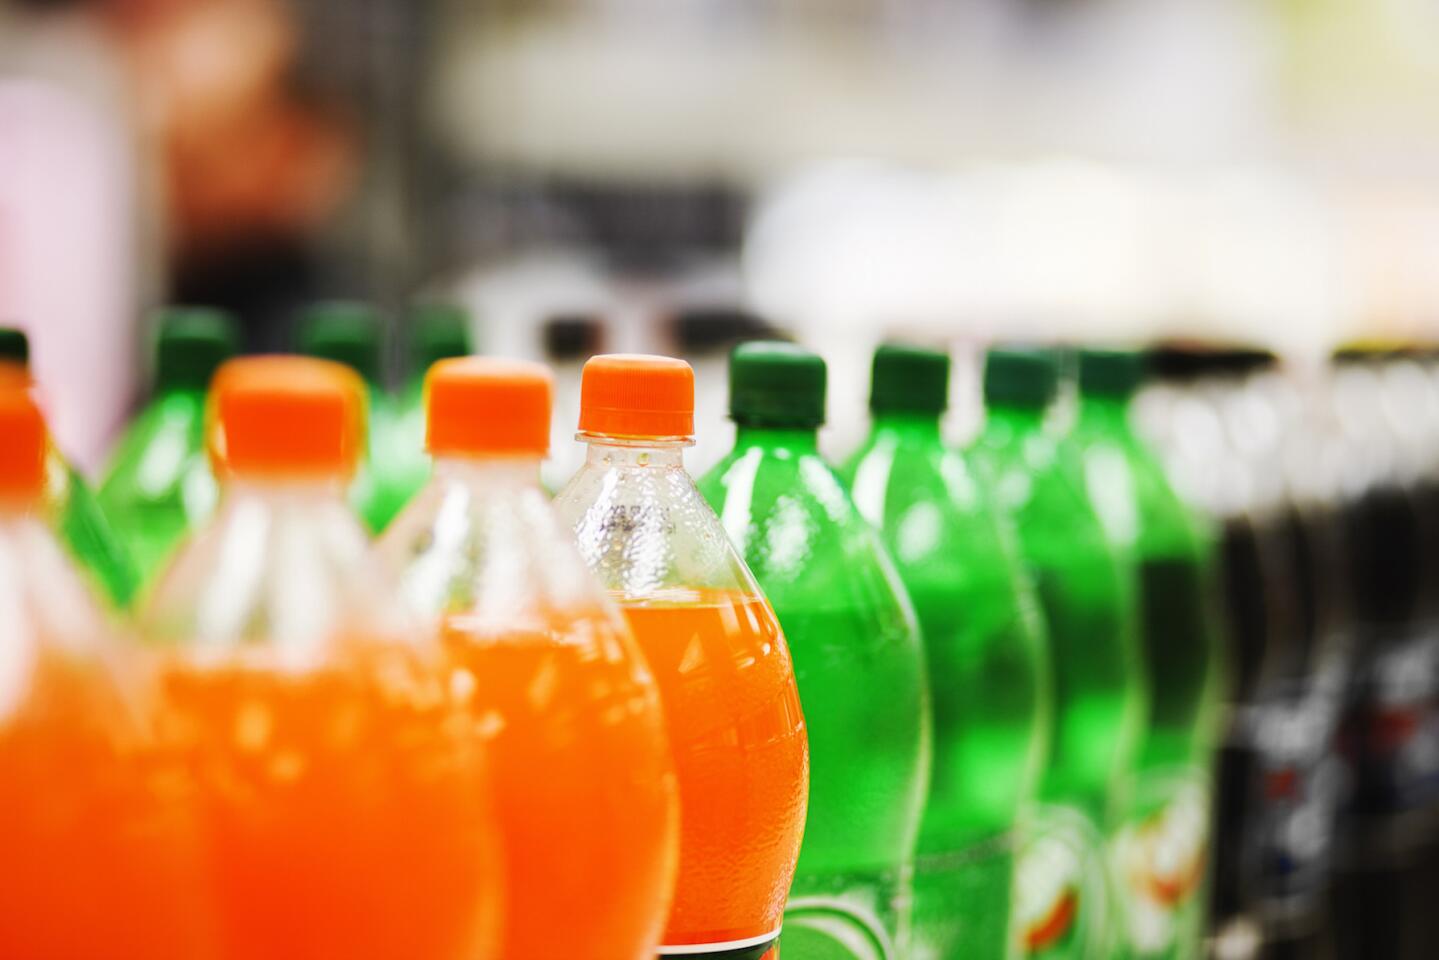 The bill filed for the 2018 legislative session would add soft drinks to the list of banned items for food stamp purchase. It defines soft drinks as "a flavored carbonated beverage that is sweetened with natural or artificial sweeteners."